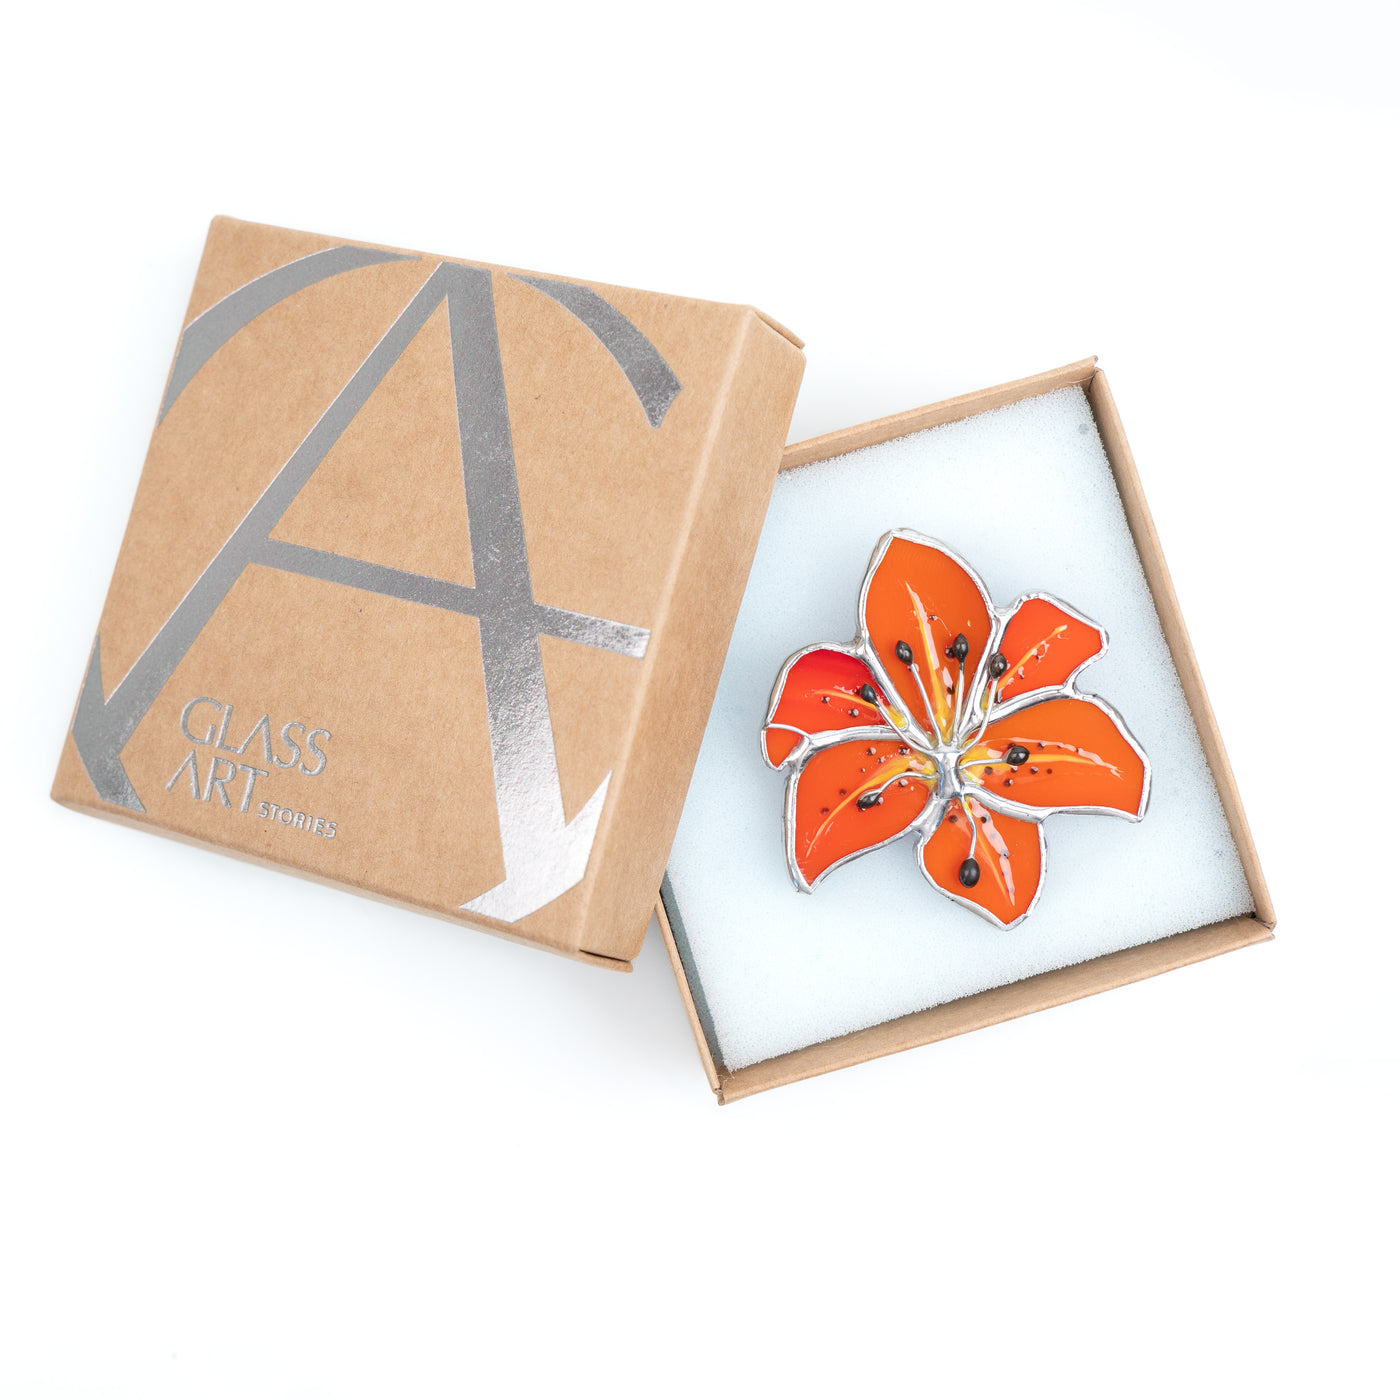 Lily brooch in a brand box